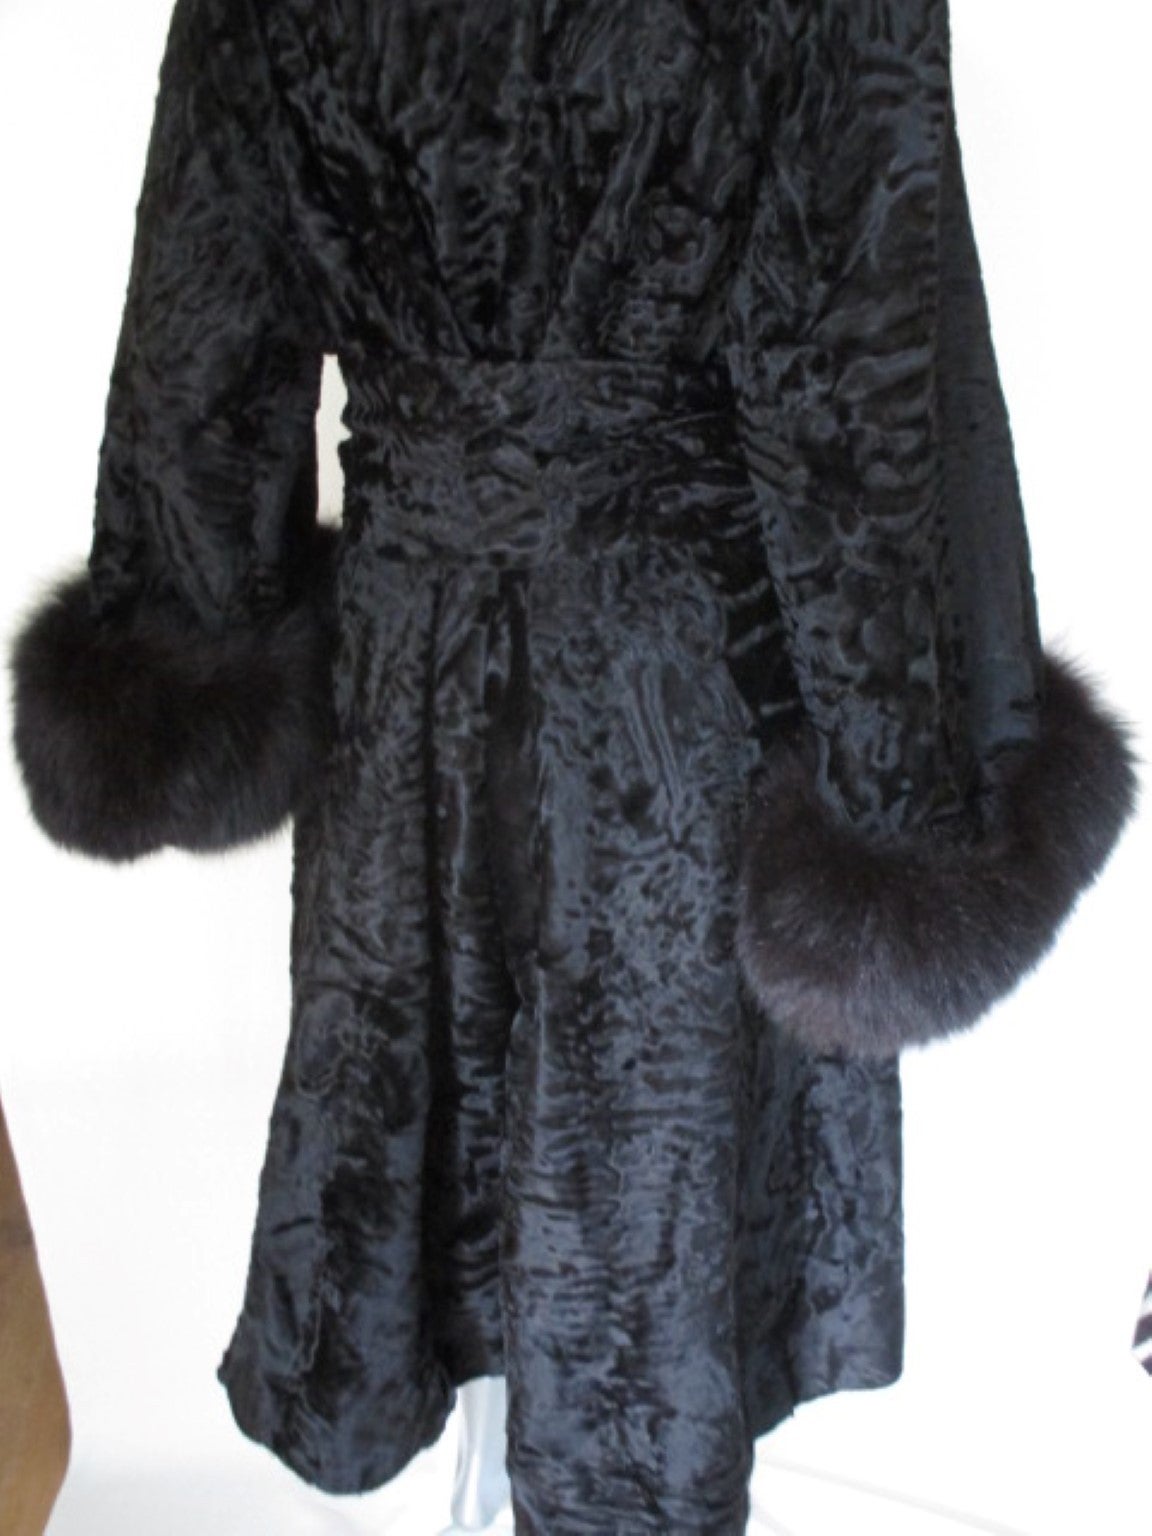 This vintage black Persian Lamb/Astrakhan coat has black fox cuffs and comes with a belt made from the same Astrakhan and fox,
The coat has 5 hooks , 4 buttons, 1 closing hook at the collar and an inside pocket.
The coat is a belted A-line model